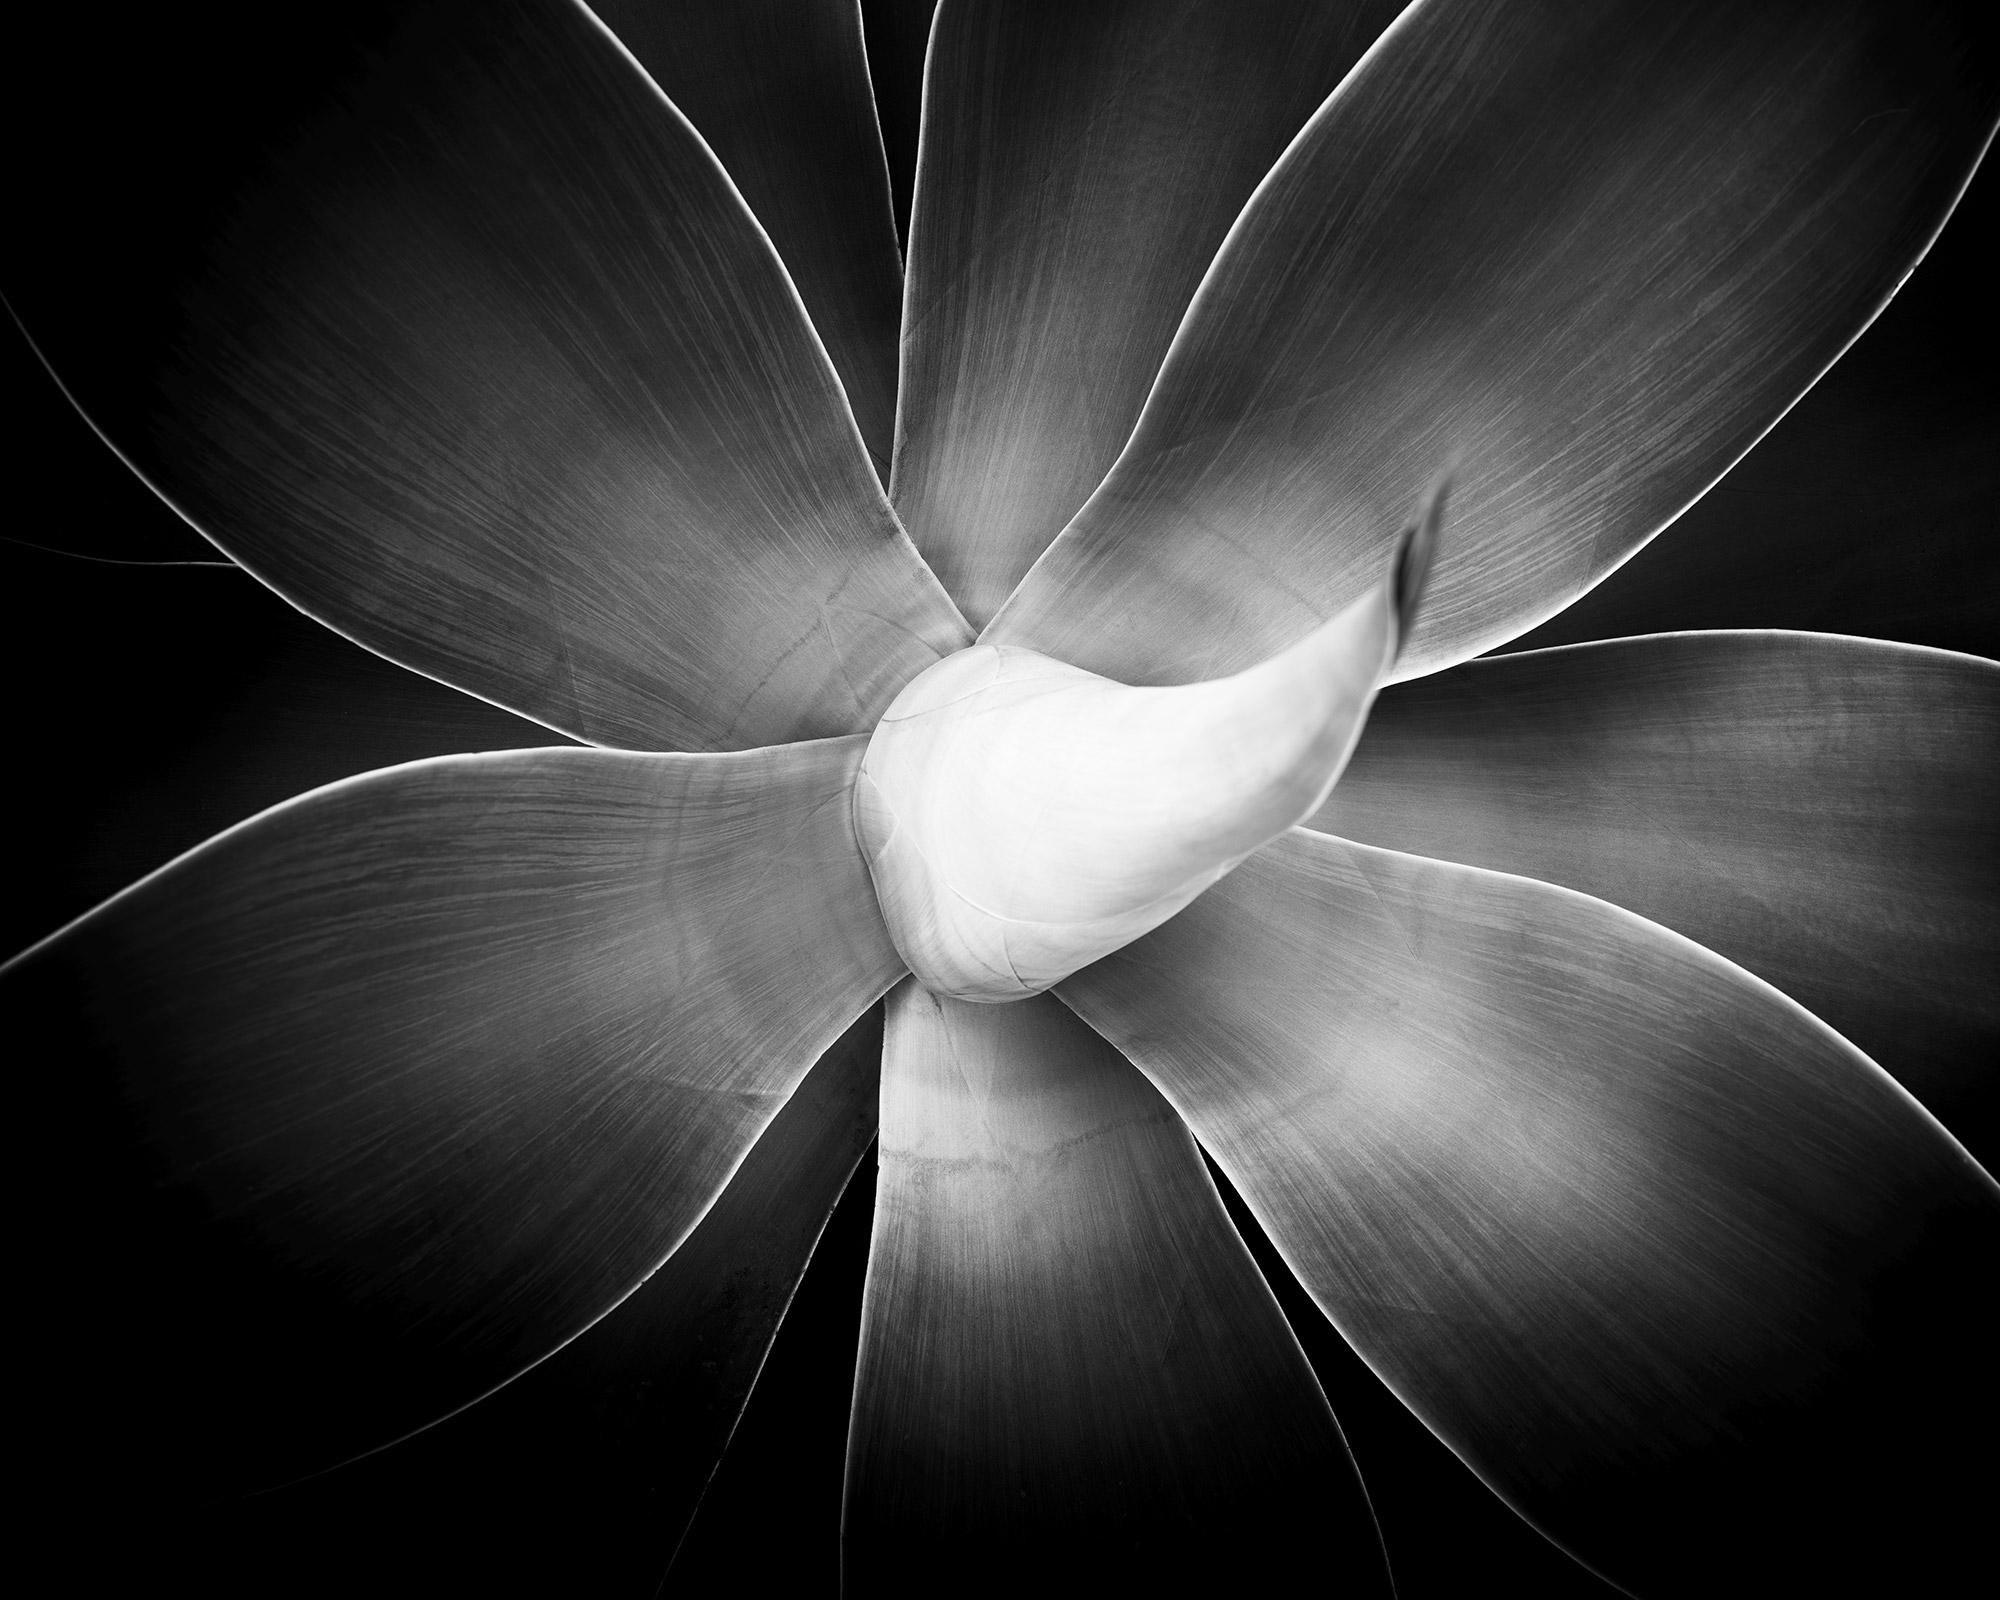 Agave attenuata, plant detail, Spain, black and white art photography, landscape